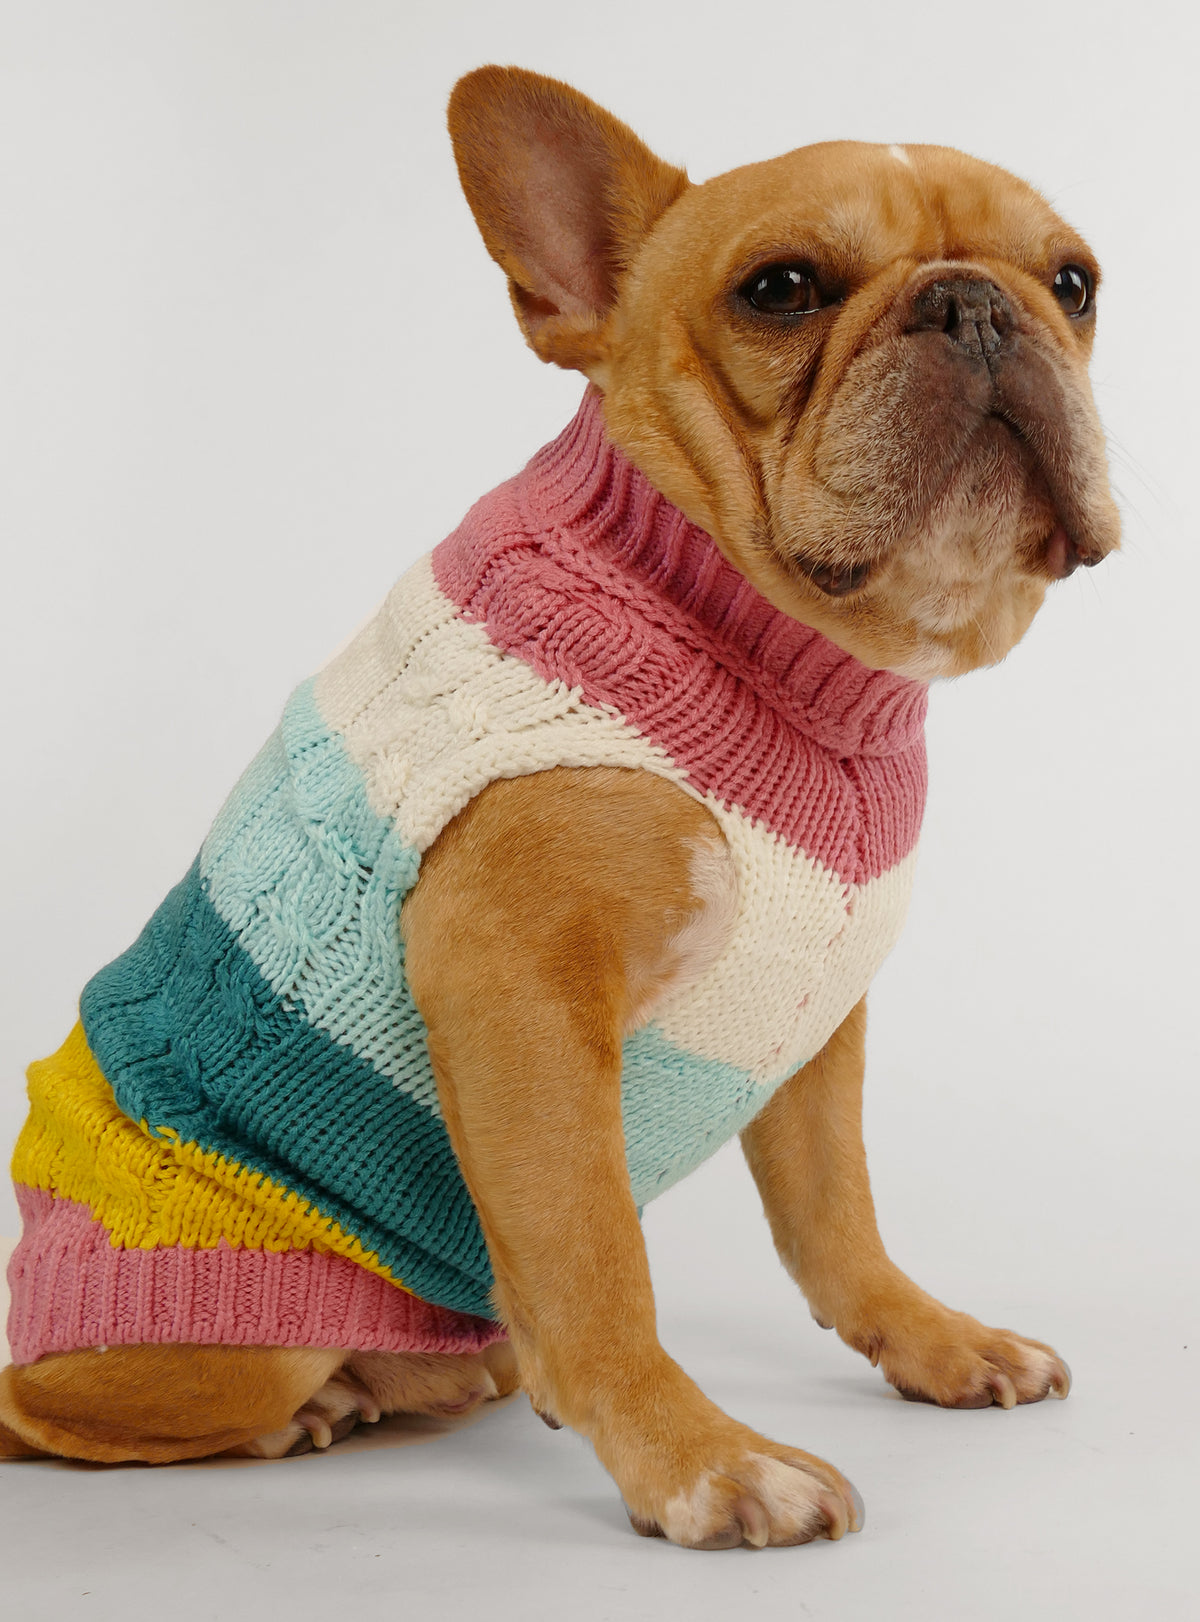 The Colorblock Dog Sweater